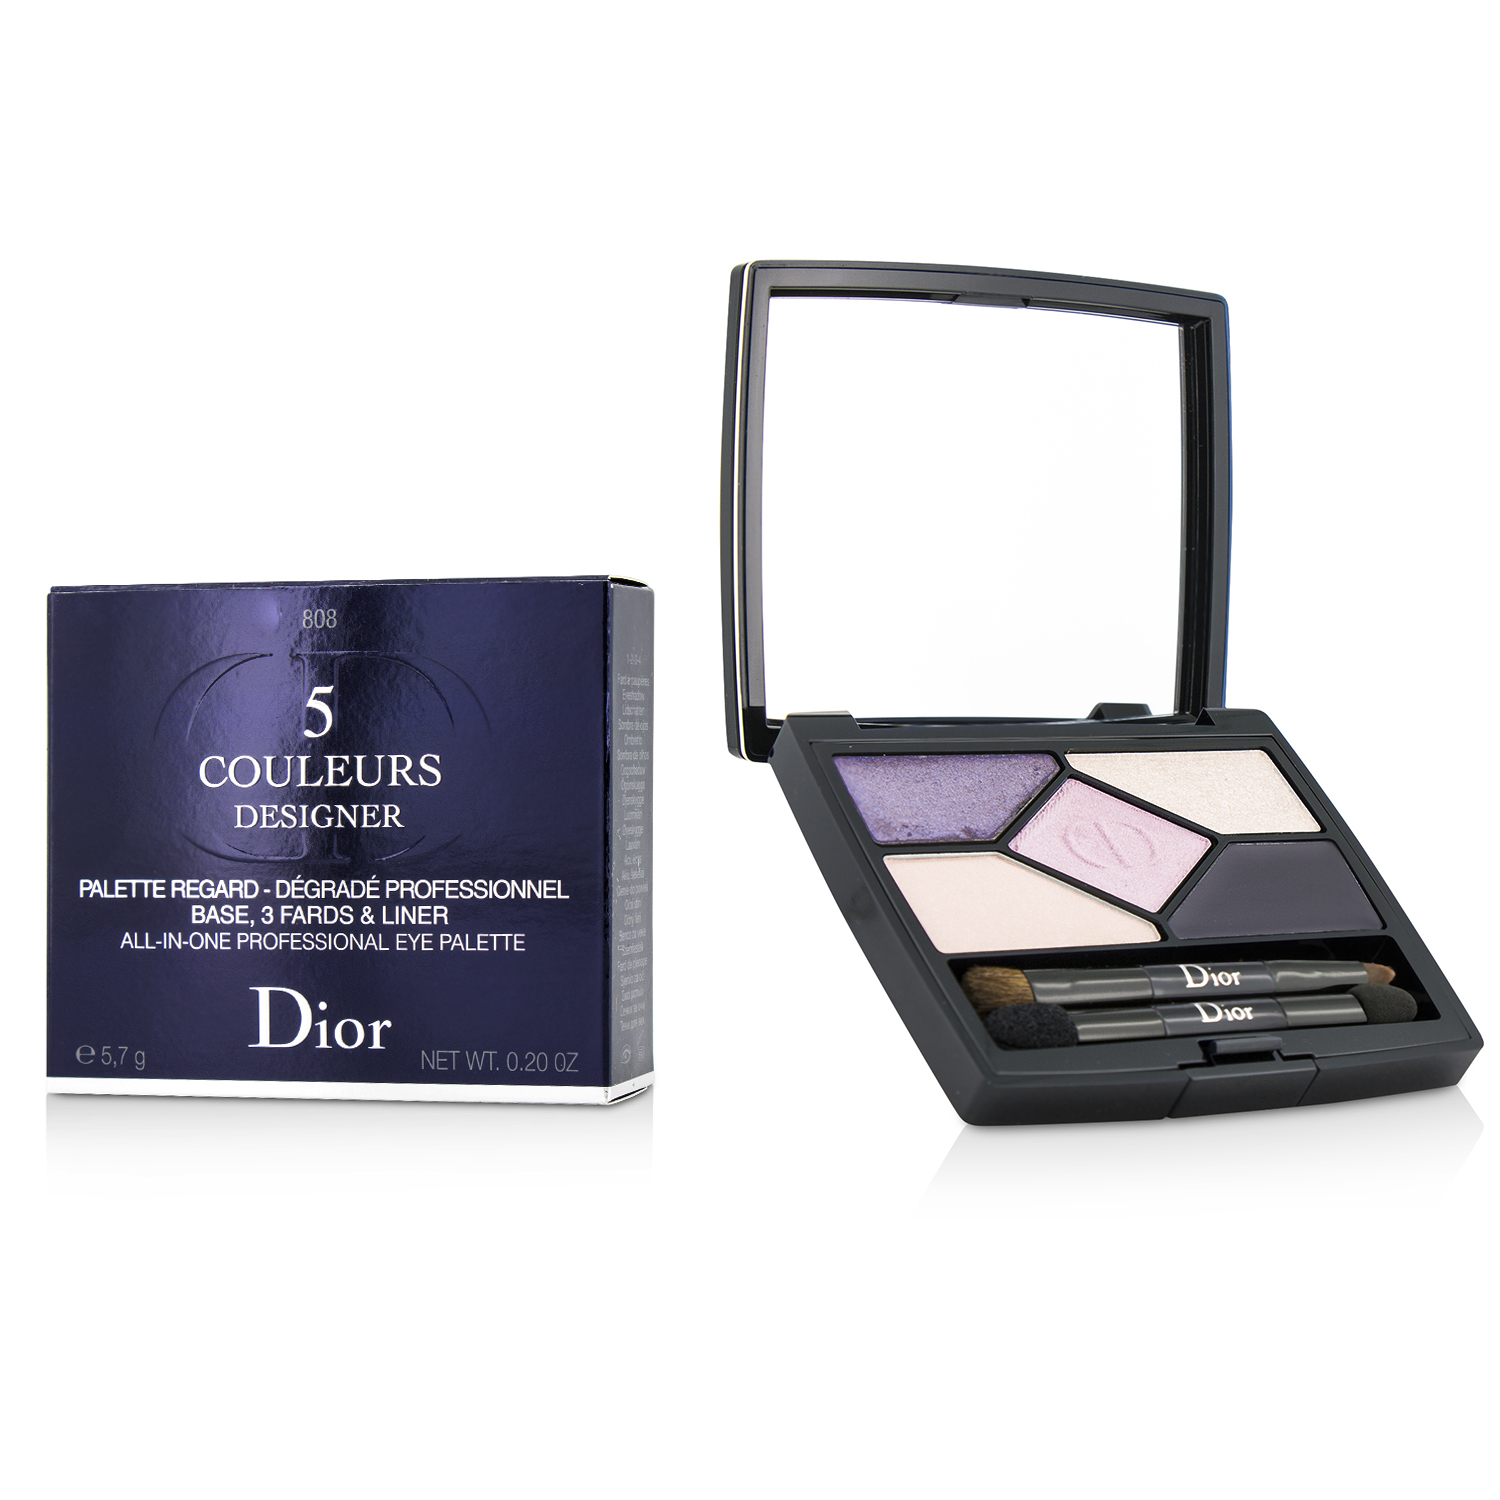 5 Couleurs Designer All In One Professional Eye Palette - # 808 Purple Design Christian Dior Image